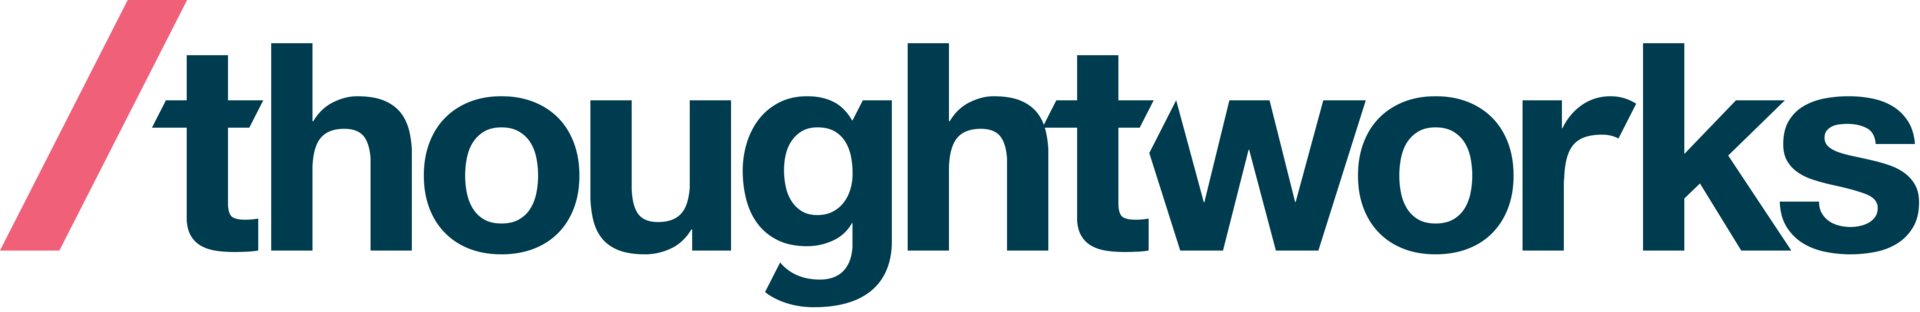 Thoughtworks Brand Logo